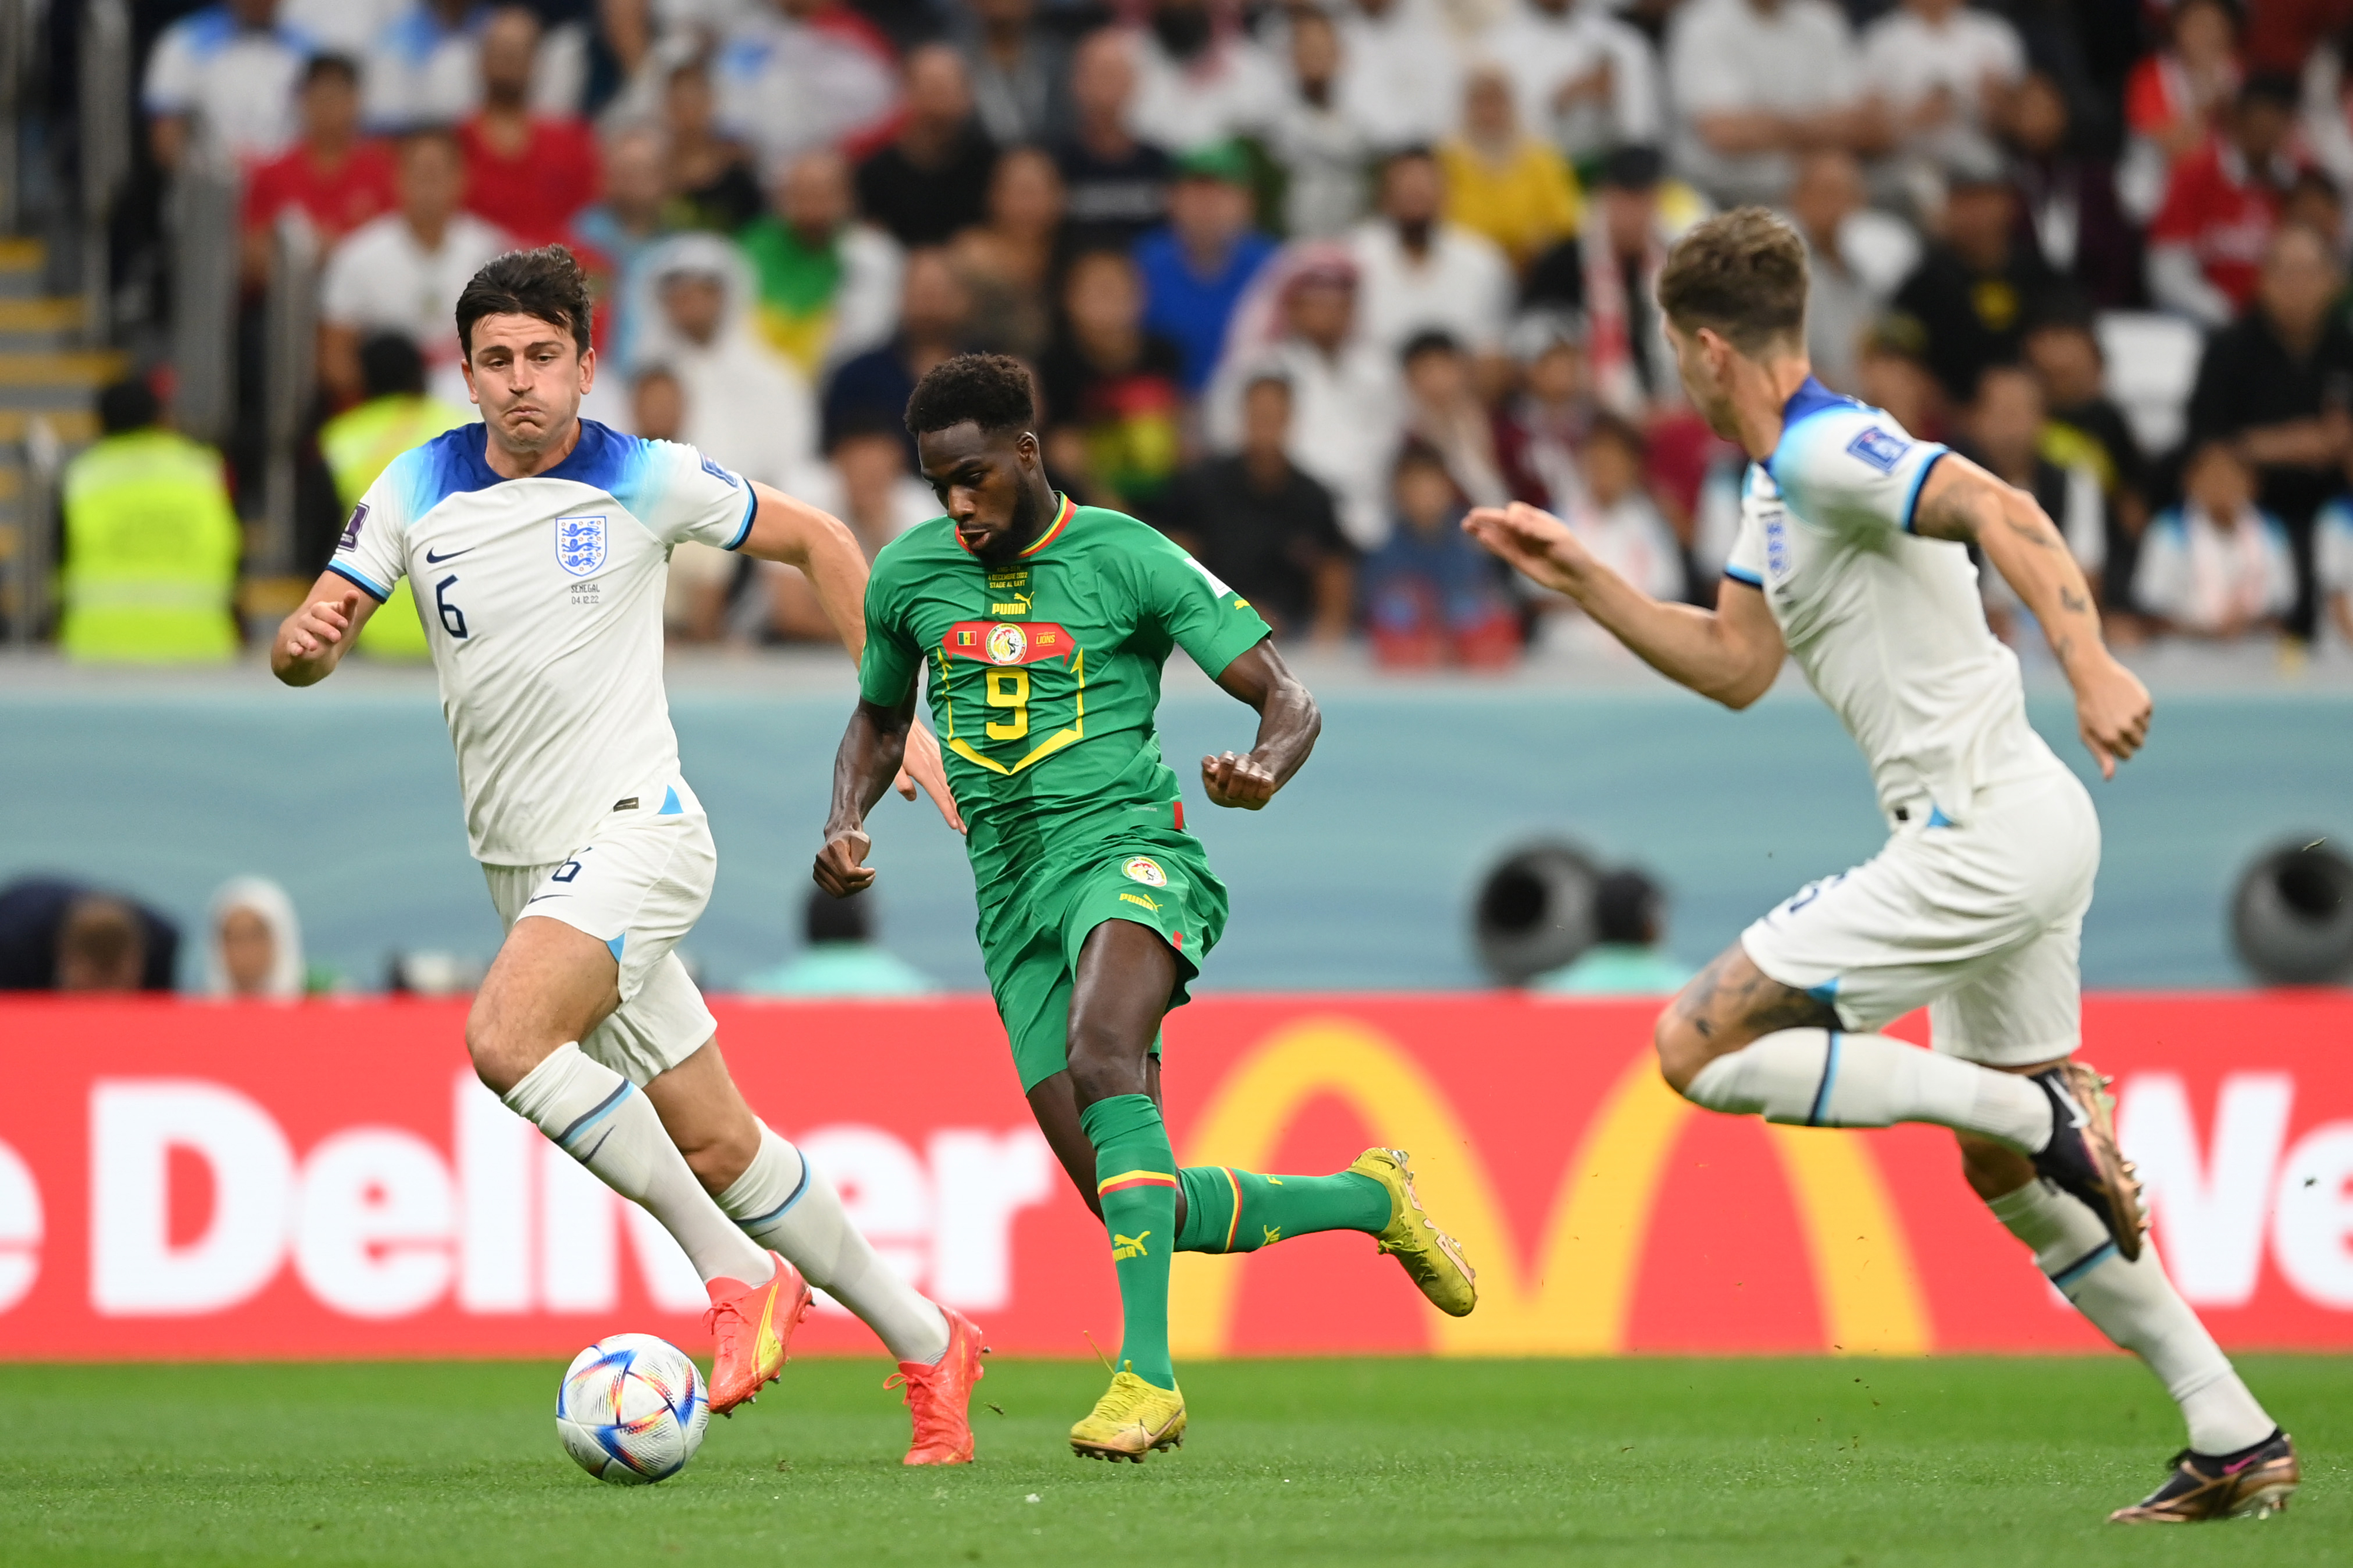 Boulaye Dia of Senegal is challenged by Harry Maguire of England during the match between England and Senegal at Al Bayt Stadium in Al Khor, Qatar on Sunday.